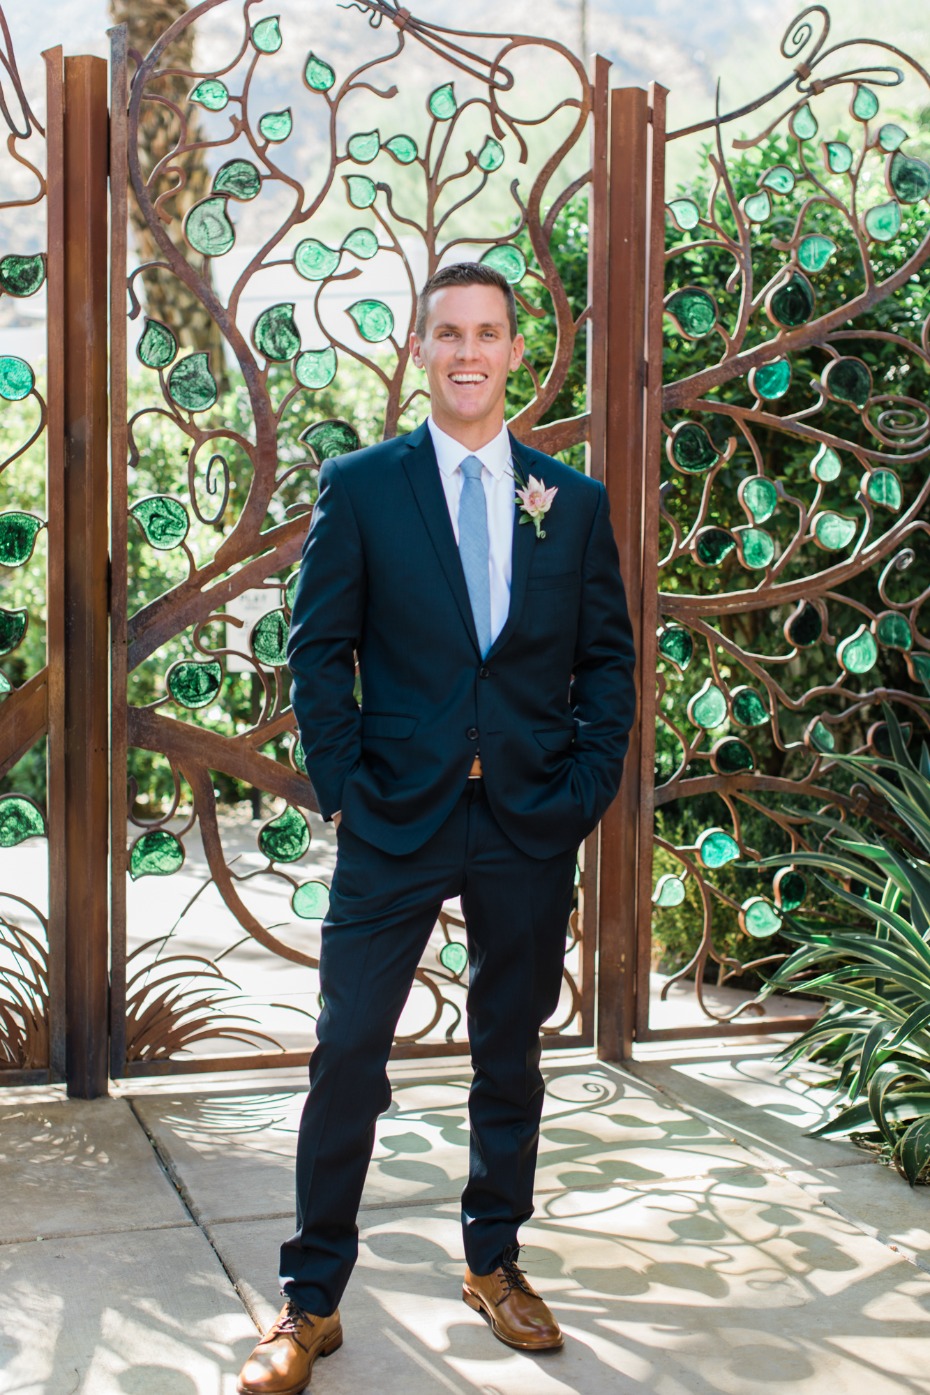 Navy suit for the groom